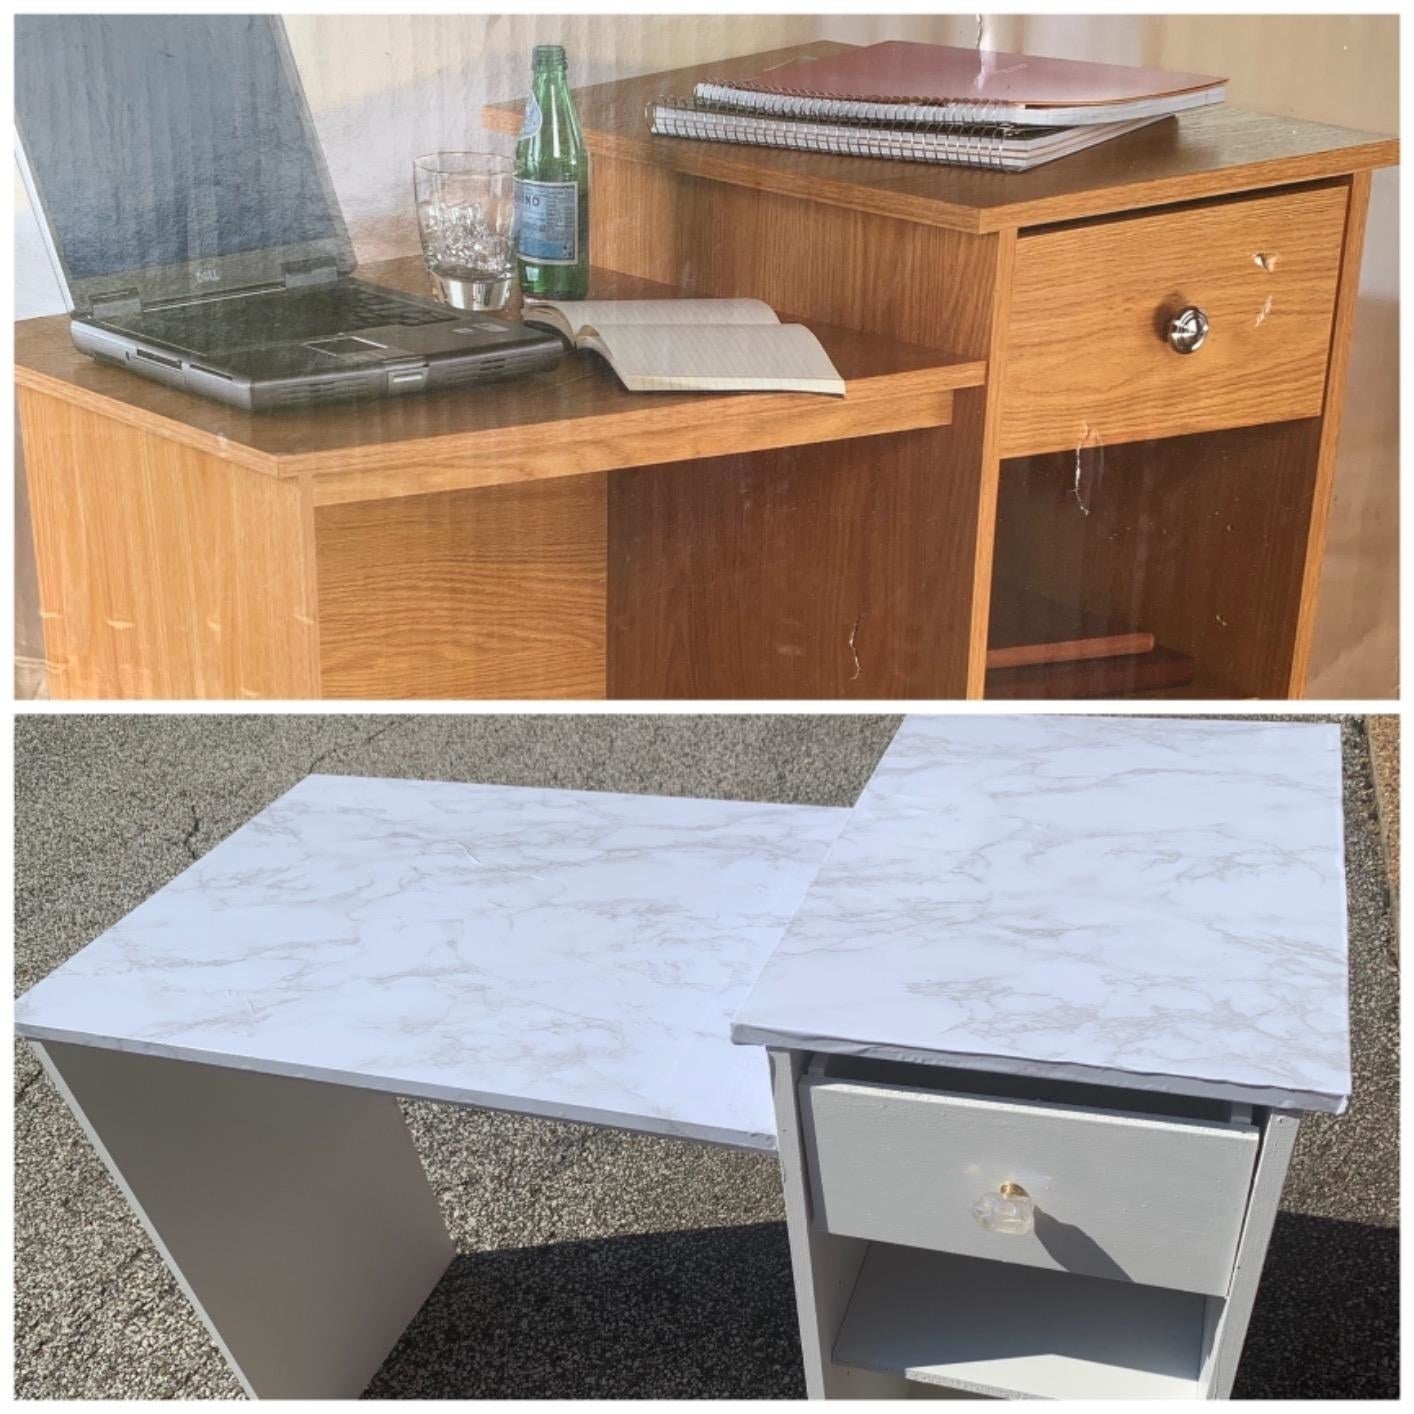 before and after reviewer images of a wooden vanity then covered with marble contact paper